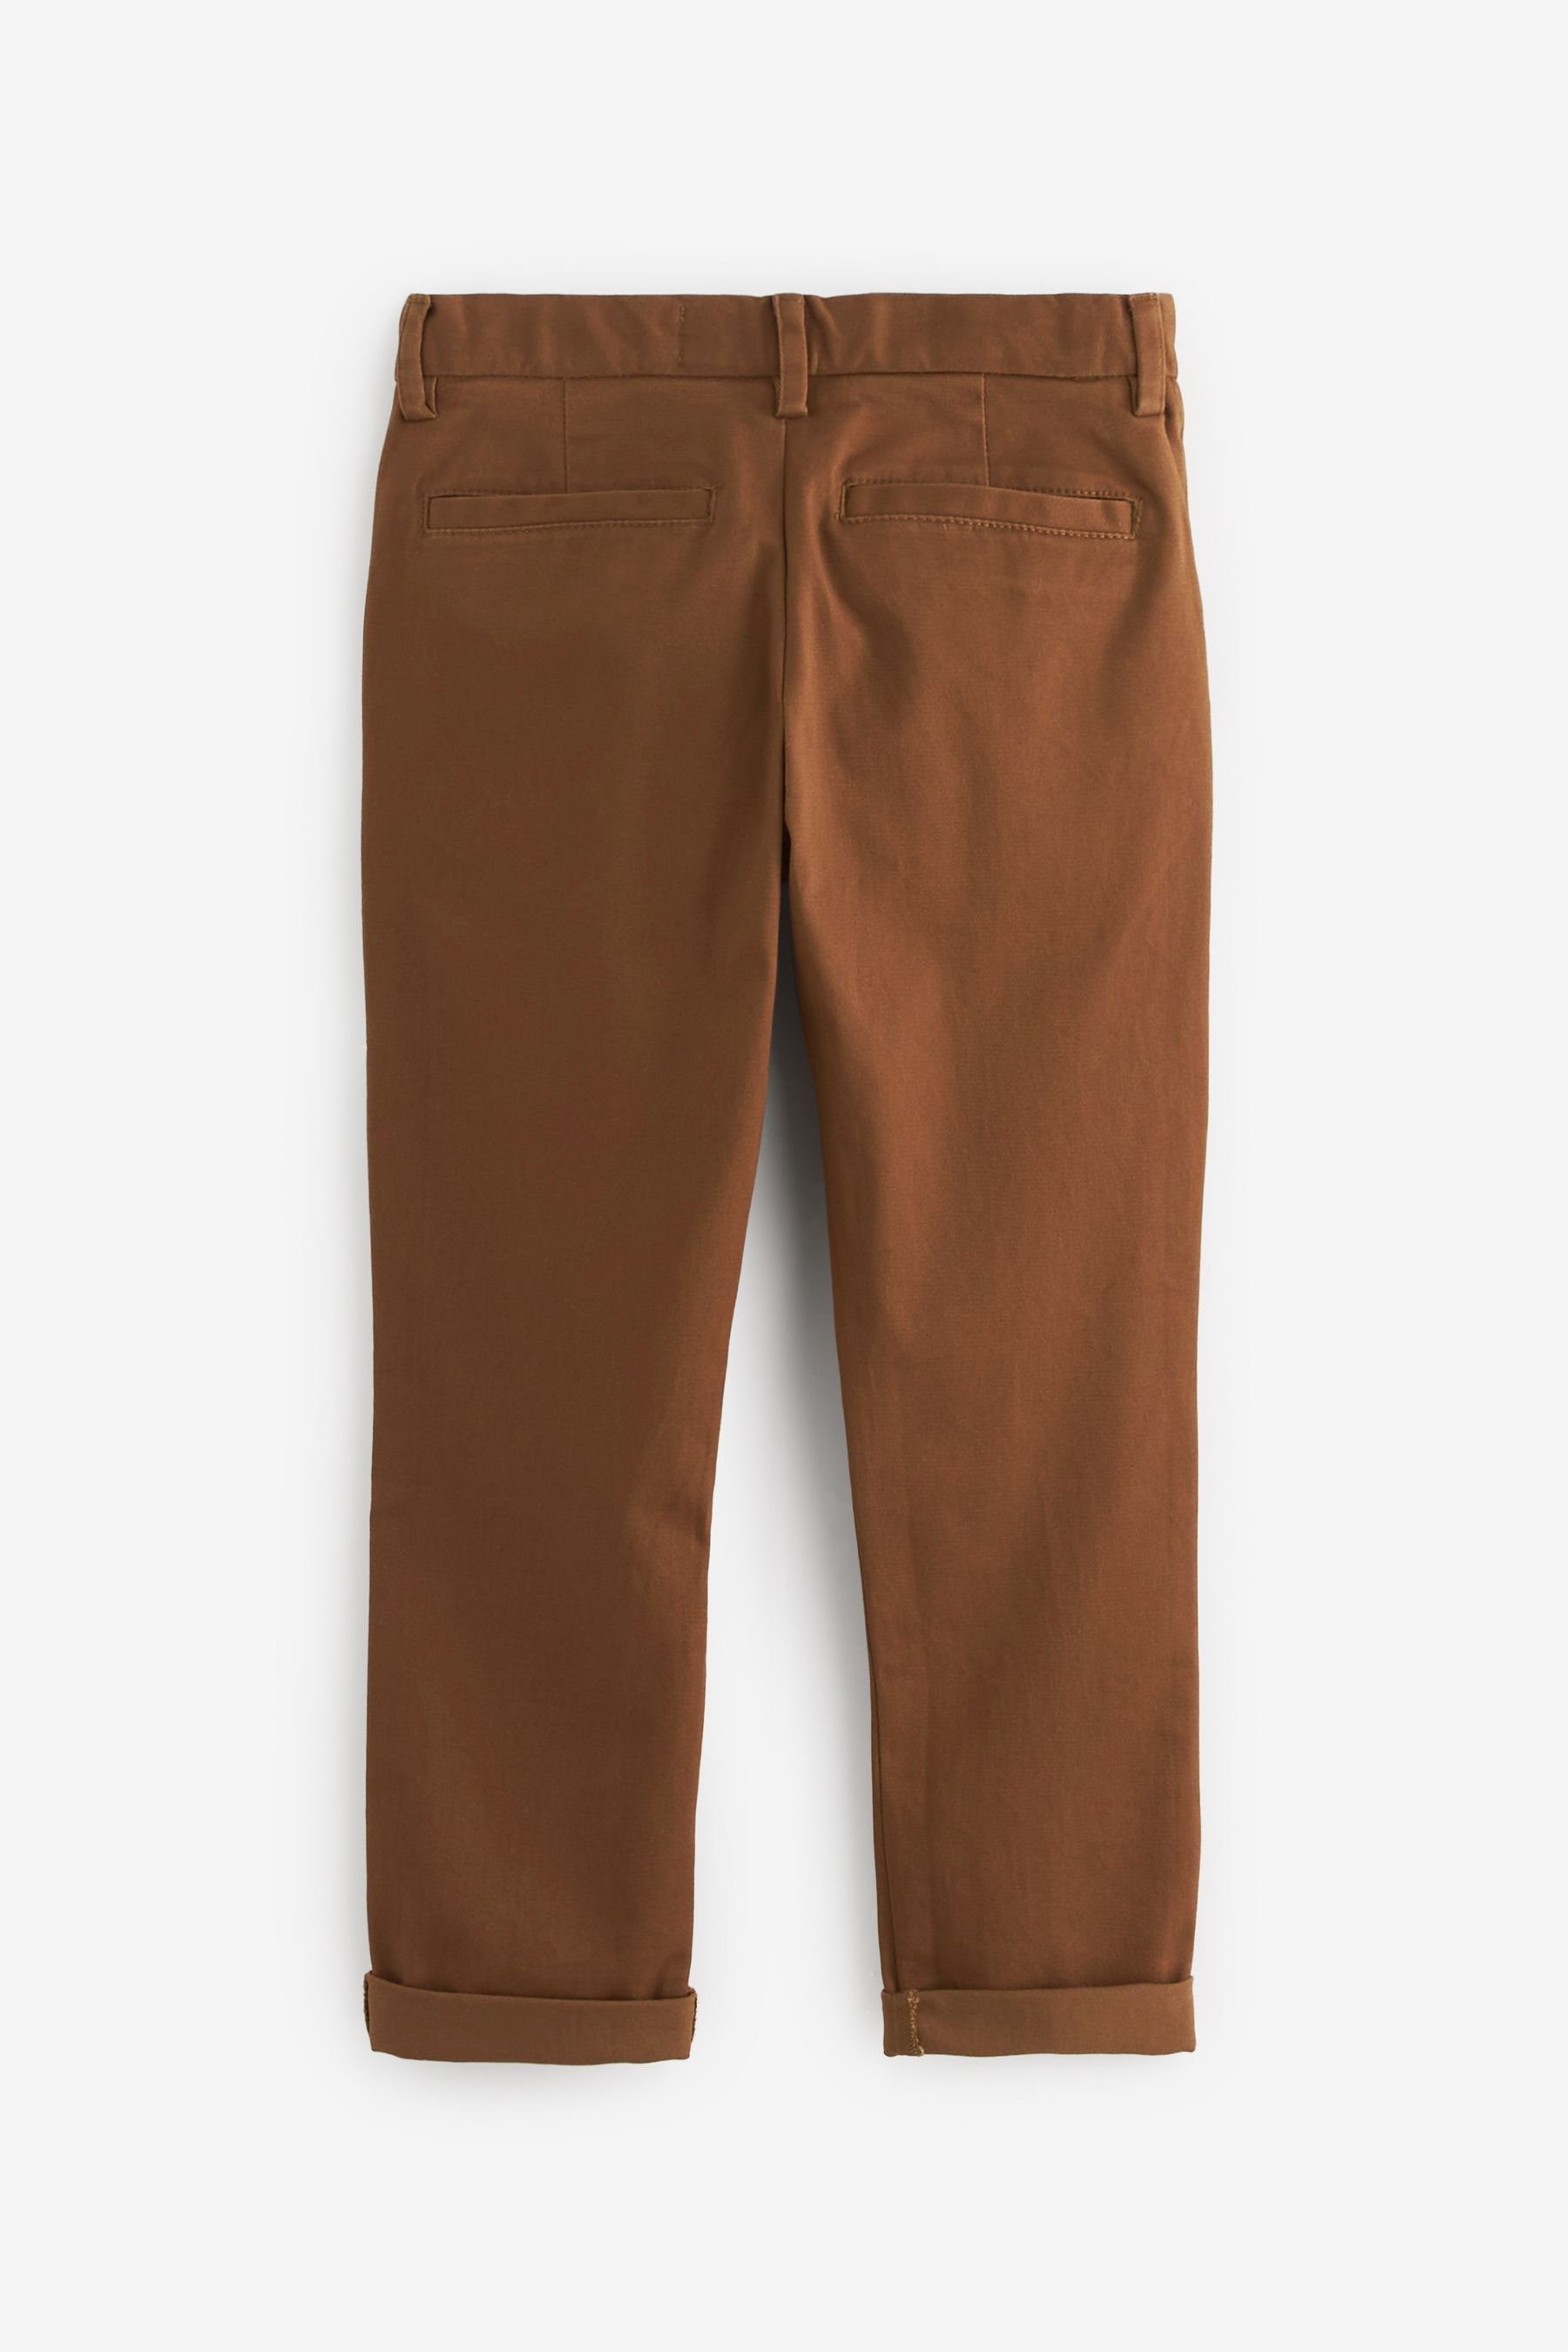 Ginger/Tan mit Stretch Chinohose Chinohose (1-tlg) Brown Next